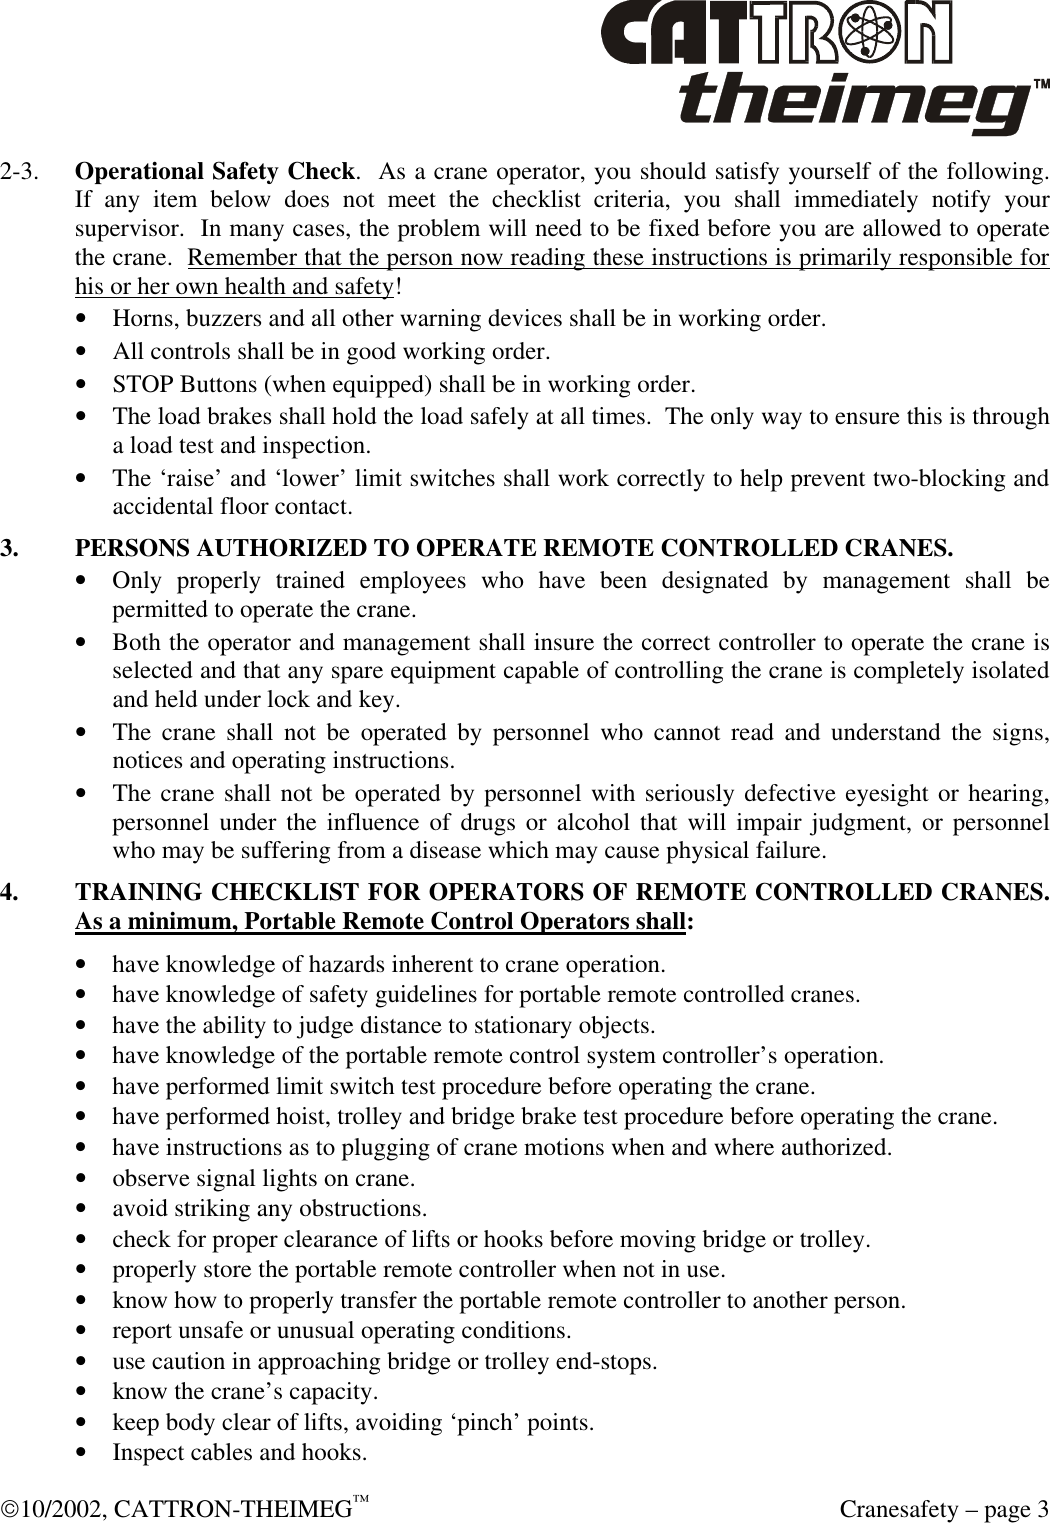  10/2002, CATTRON-THEIMEG™  Cranesafety – page 3 2-3. Operational Safety Check.  As a crane operator, you should satisfy yourself of the following.  If any item below does not meet the checklist criteria, you shall immediately notify your supervisor.  In many cases, the problem will need to be fixed before you are allowed to operate the crane.  Remember that the person now reading these instructions is primarily responsible for his or her own health and safety! • Horns, buzzers and all other warning devices shall be in working order. • All controls shall be in good working order. • STOP Buttons (when equipped) shall be in working order.  • The load brakes shall hold the load safely at all times.  The only way to ensure this is through a load test and inspection. • The ‘raise’ and ‘lower’ limit switches shall work correctly to help prevent two-blocking and accidental floor contact.  3. PERSONS AUTHORIZED TO OPERATE REMOTE CONTROLLED CRANES. • Only properly trained employees who have been designated by management shall be permitted to operate the crane. • Both the operator and management shall insure the correct controller to operate the crane is selected and that any spare equipment capable of controlling the crane is completely isolated and held under lock and key. • The crane shall not be operated by personnel who cannot read and understand the signs, notices and operating instructions. • The crane shall not be operated by personnel with seriously defective eyesight or hearing, personnel under the influence of drugs or alcohol that will impair judgment, or personnel who may be suffering from a disease which may cause physical failure.   4. TRAINING CHECKLIST FOR OPERATORS OF REMOTE CONTROLLED CRANES. As a minimum, Portable Remote Control Operators shall: • have knowledge of hazards inherent to crane operation. • have knowledge of safety guidelines for portable remote controlled cranes. • have the ability to judge distance to stationary objects. • have knowledge of the portable remote control system controller’s operation. • have performed limit switch test procedure before operating the crane. • have performed hoist, trolley and bridge brake test procedure before operating the crane. • have instructions as to plugging of crane motions when and where authorized. • observe signal lights on crane. • avoid striking any obstructions. • check for proper clearance of lifts or hooks before moving bridge or trolley. • properly store the portable remote controller when not in use. • know how to properly transfer the portable remote controller to another person. • report unsafe or unusual operating conditions. • use caution in approaching bridge or trolley end-stops. • know the crane’s capacity. • keep body clear of lifts, avoiding ‘pinch’ points. • Inspect cables and hooks. 